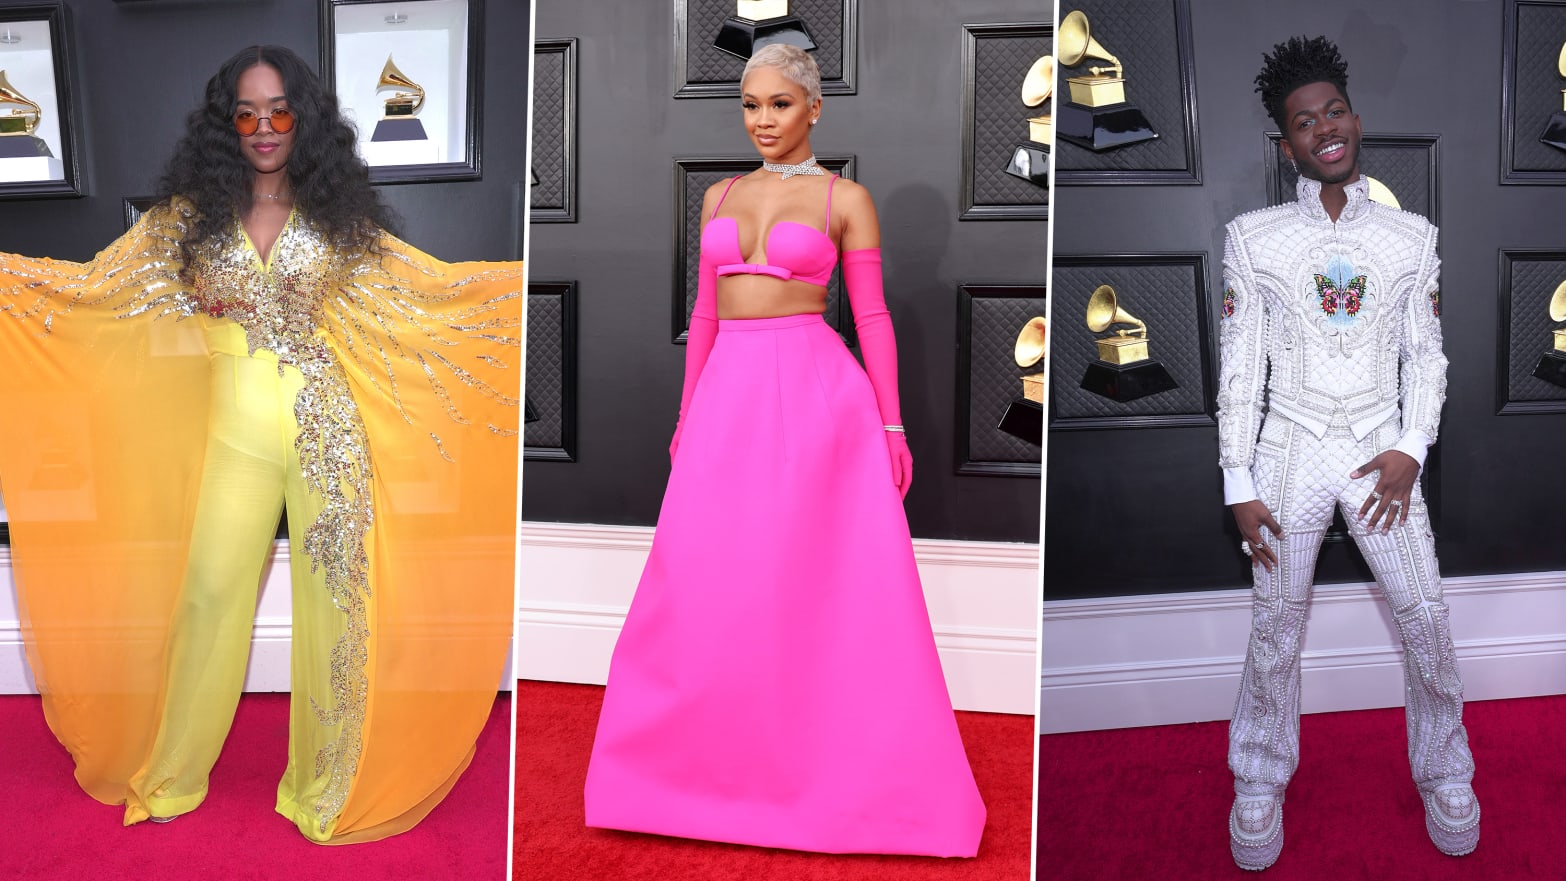 Lil Nas X, Saweetie, and Halsey Rock the Grammys Red Carpet